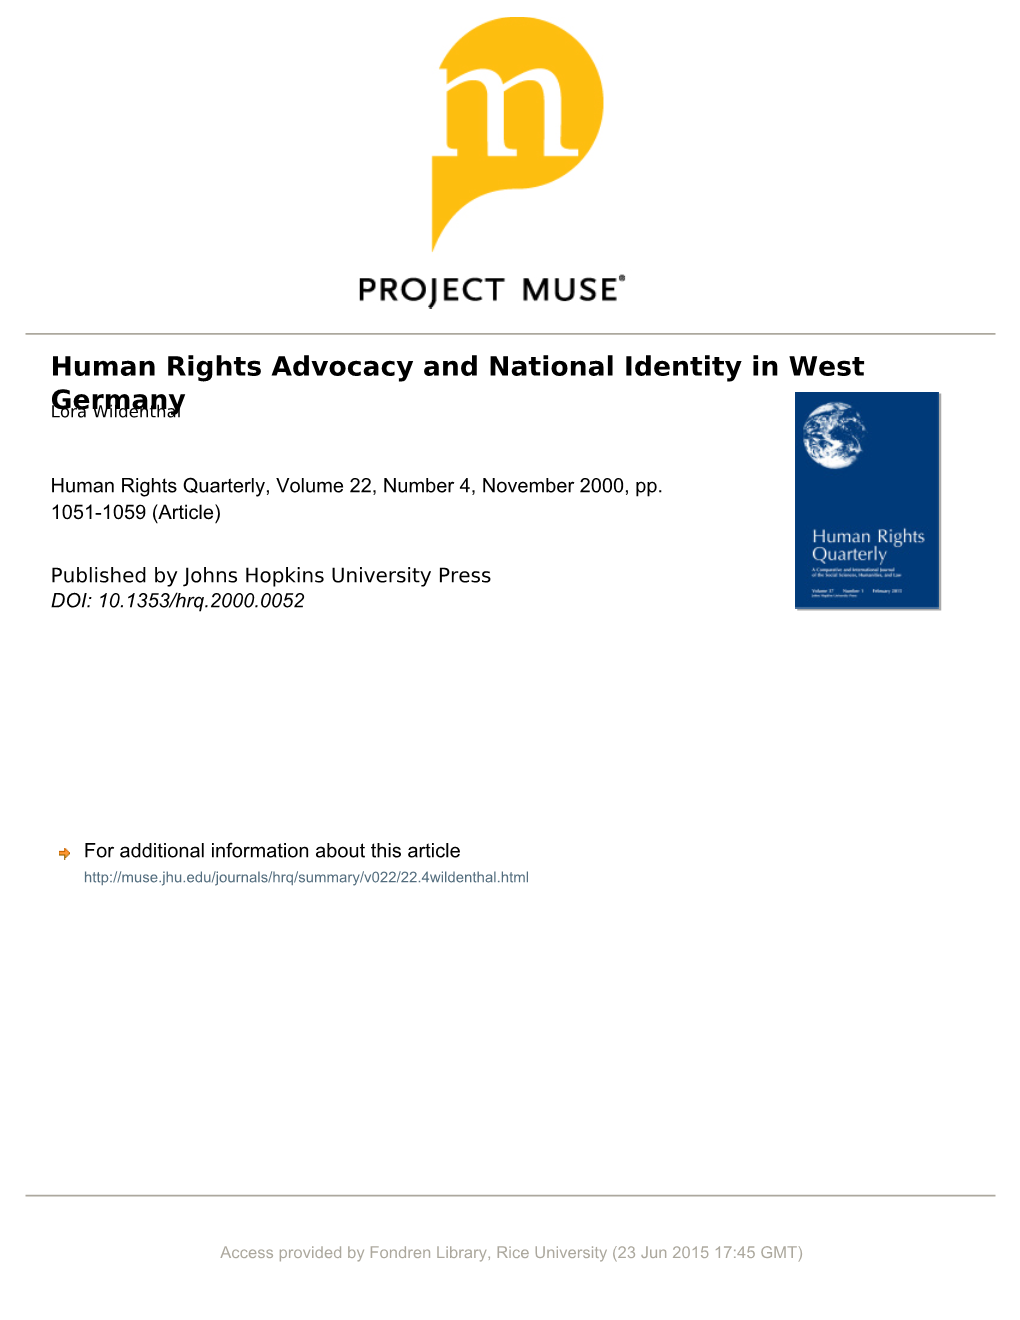 Human Rights Advocacy and National Identity in West Germany